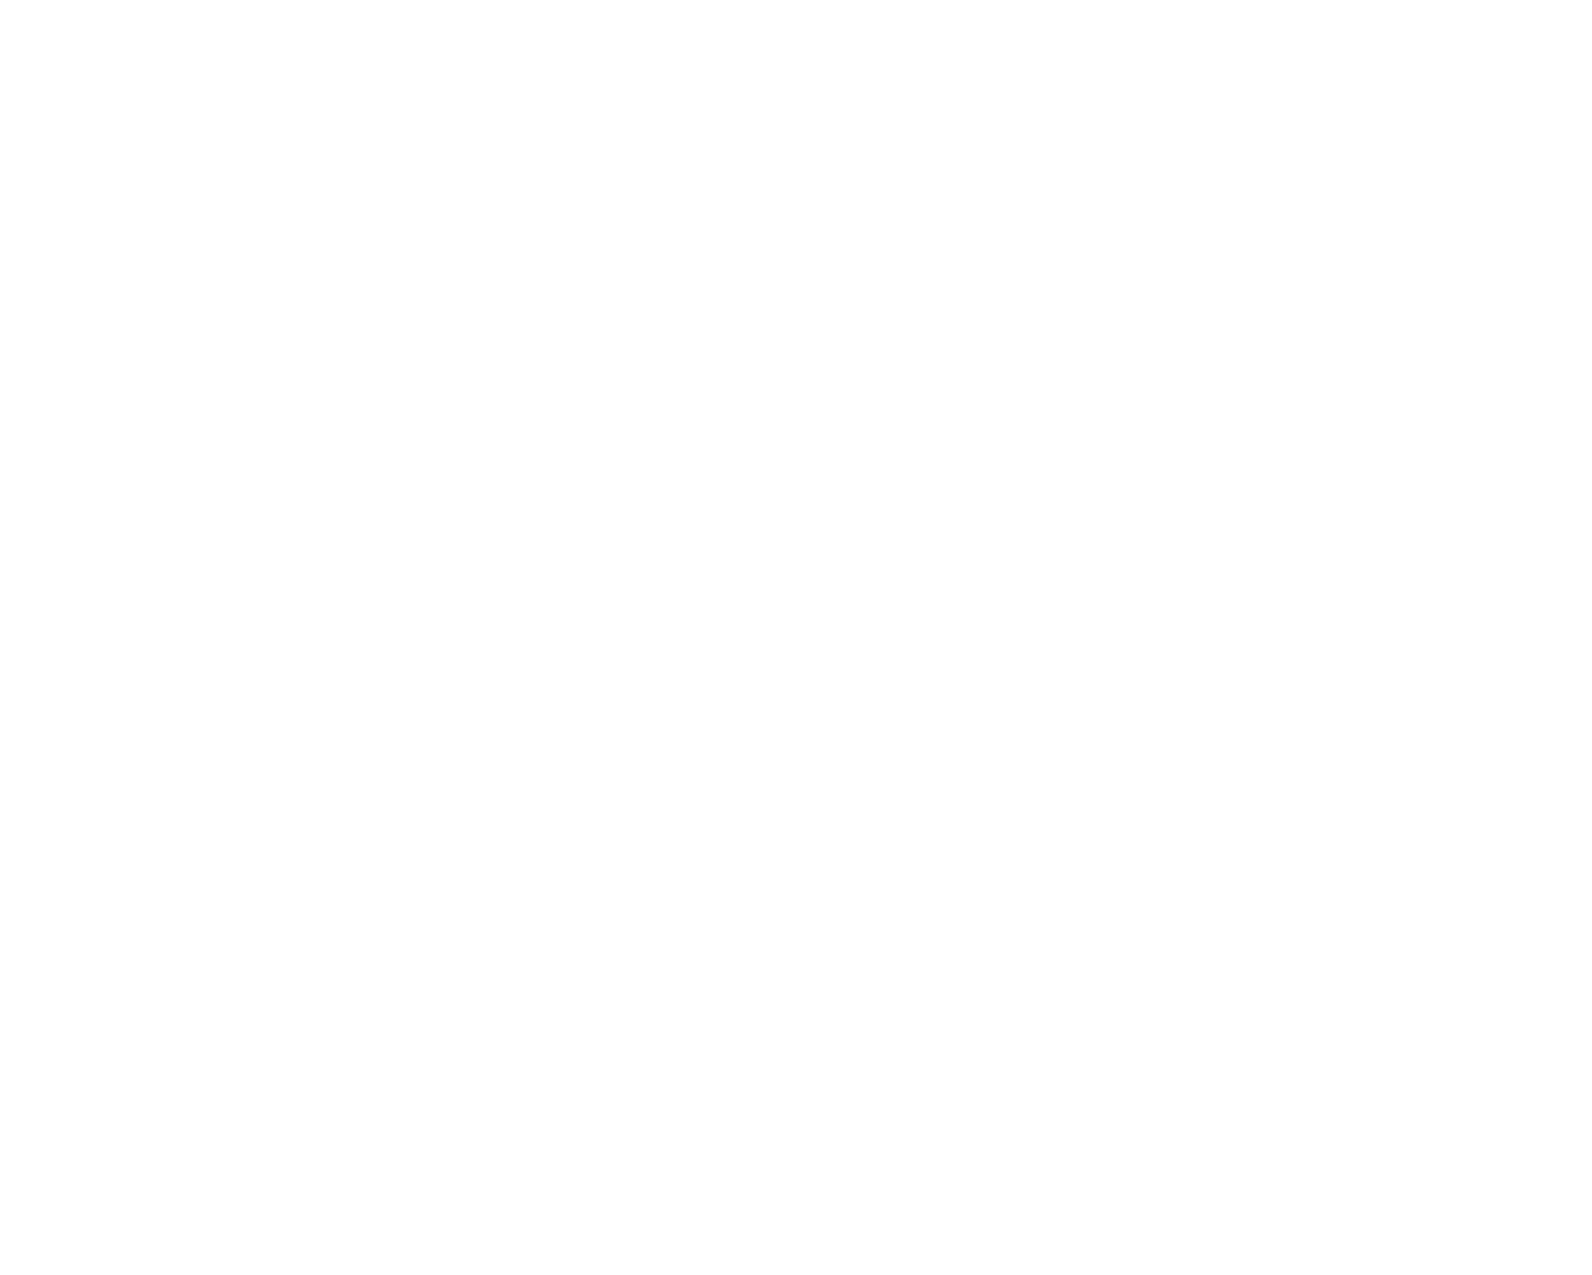 Waters Corporation logo for dark backgrounds (transparent PNG)